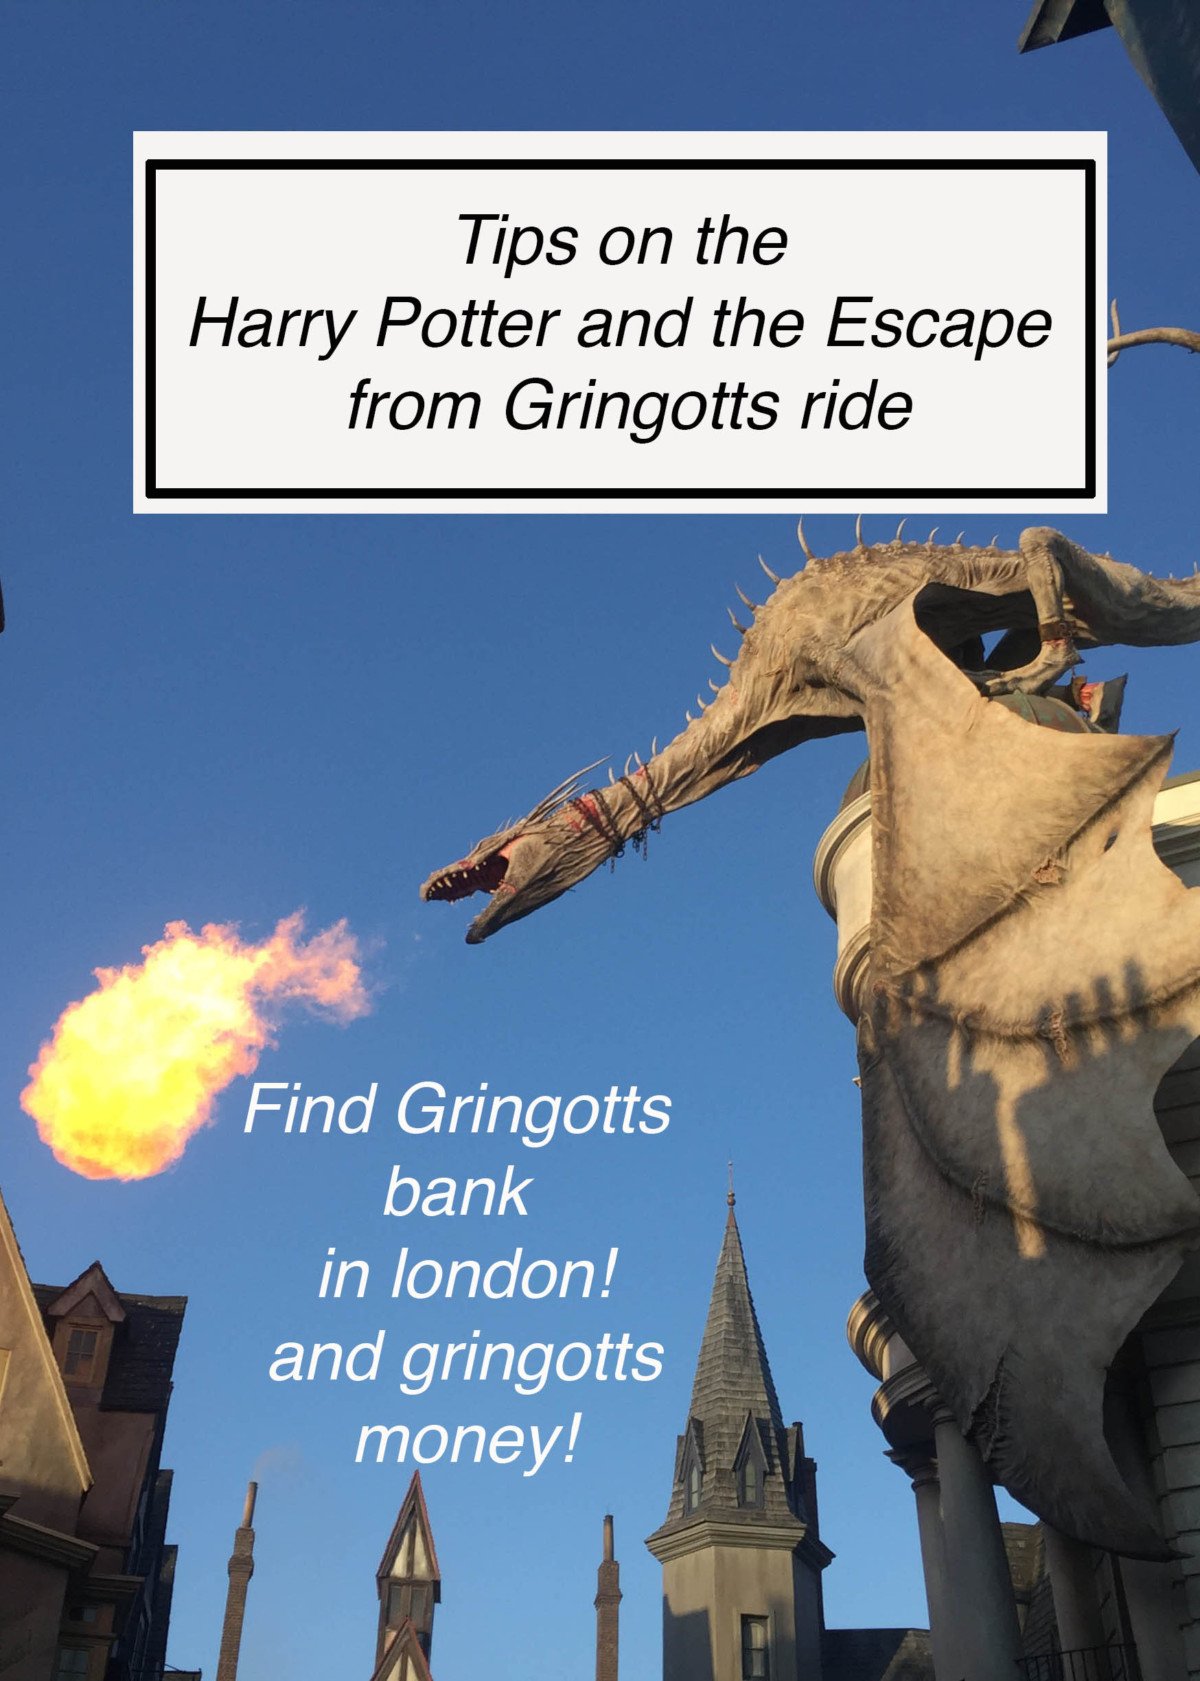 Harry Potter and the Escape from Gringotts pin